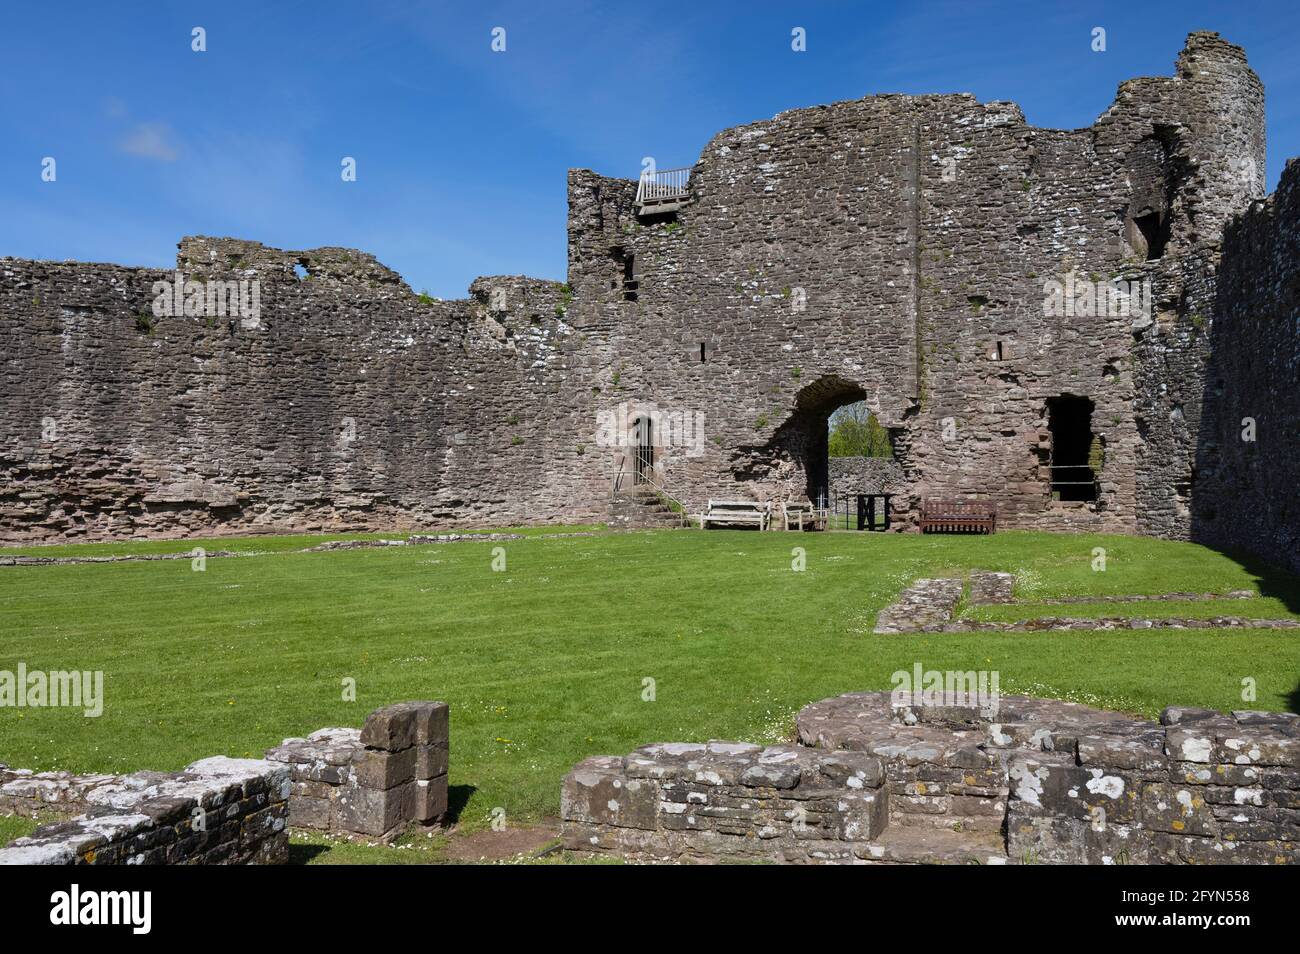 The Inner ward in White Castle, Monmouthshire, Wales Stockfoto